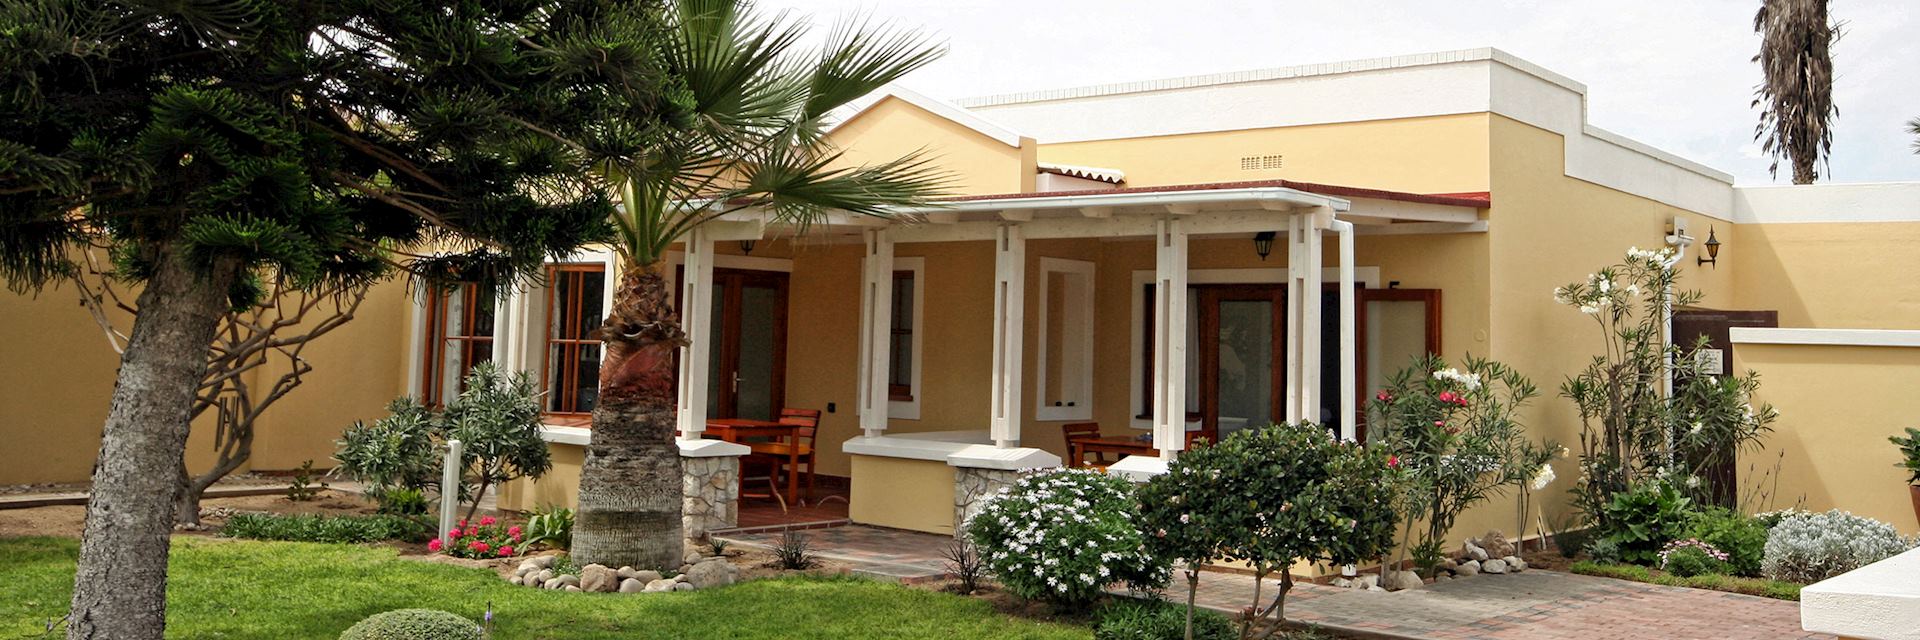 Cornerstone Guesthouse, Namibia